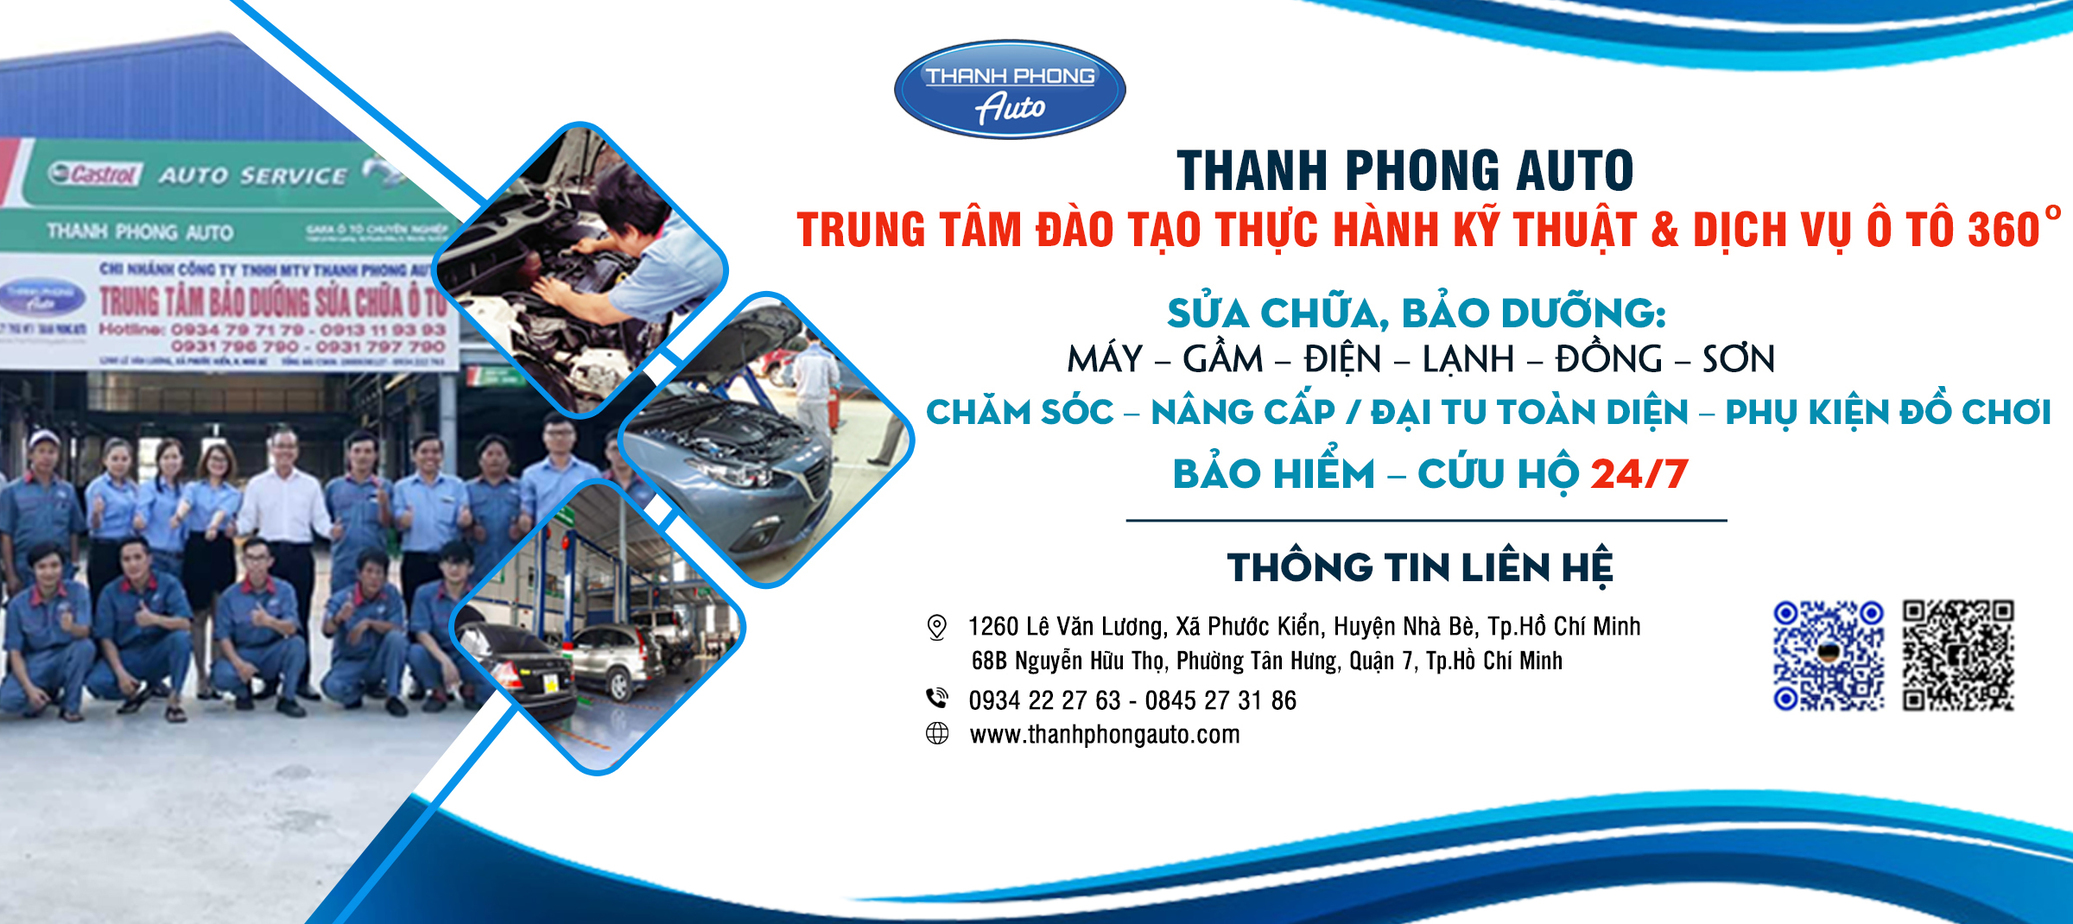 Banner address instructions, training, repair and maintenance of cars in Saigon